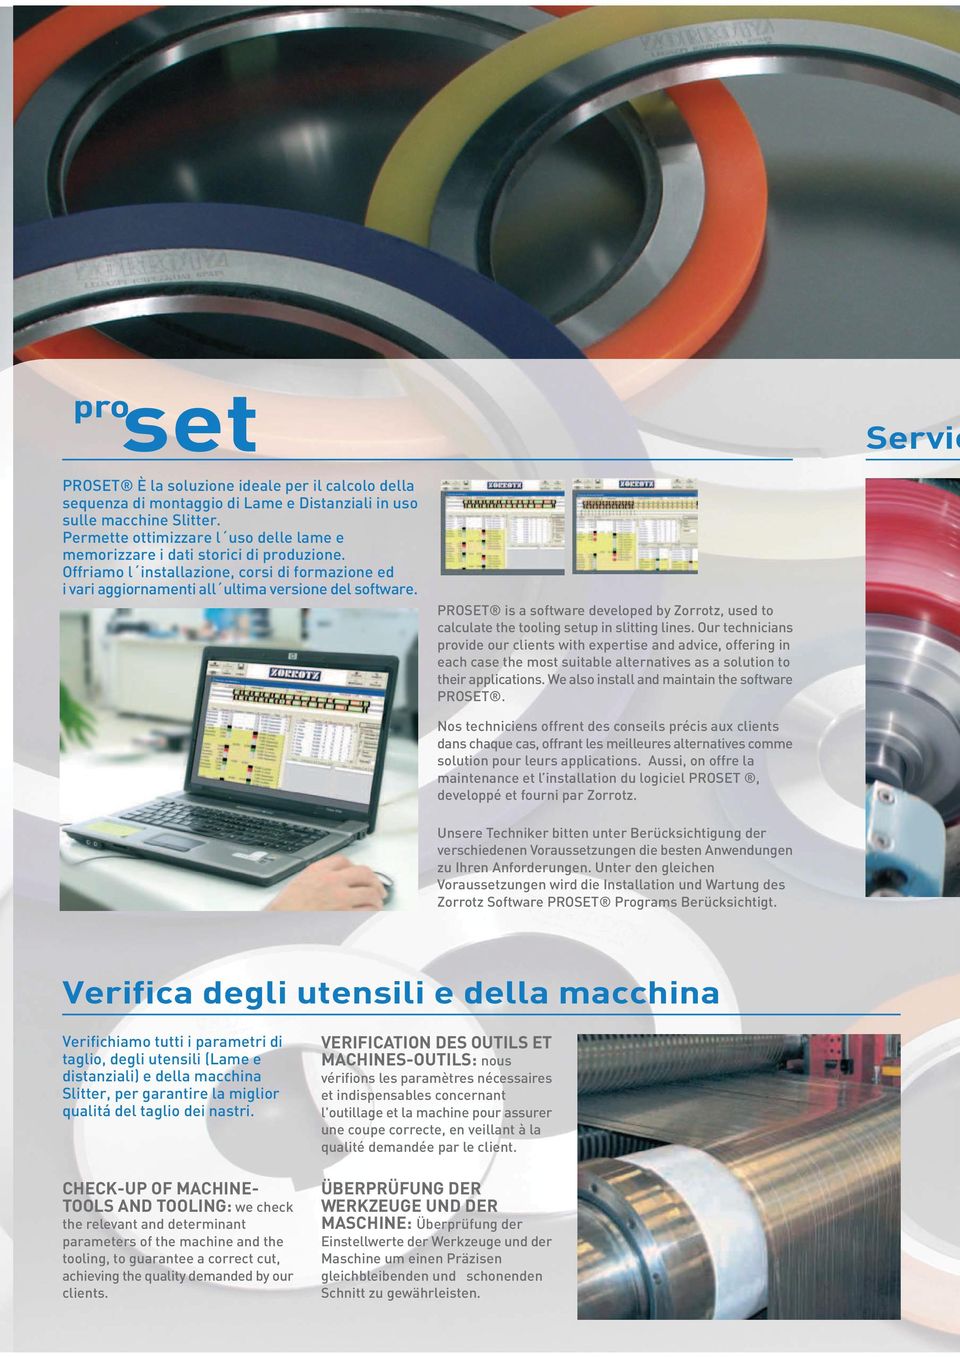 PROSET is a software developed by Zorrotz, used to calculate the tooling setup in slitting lines.